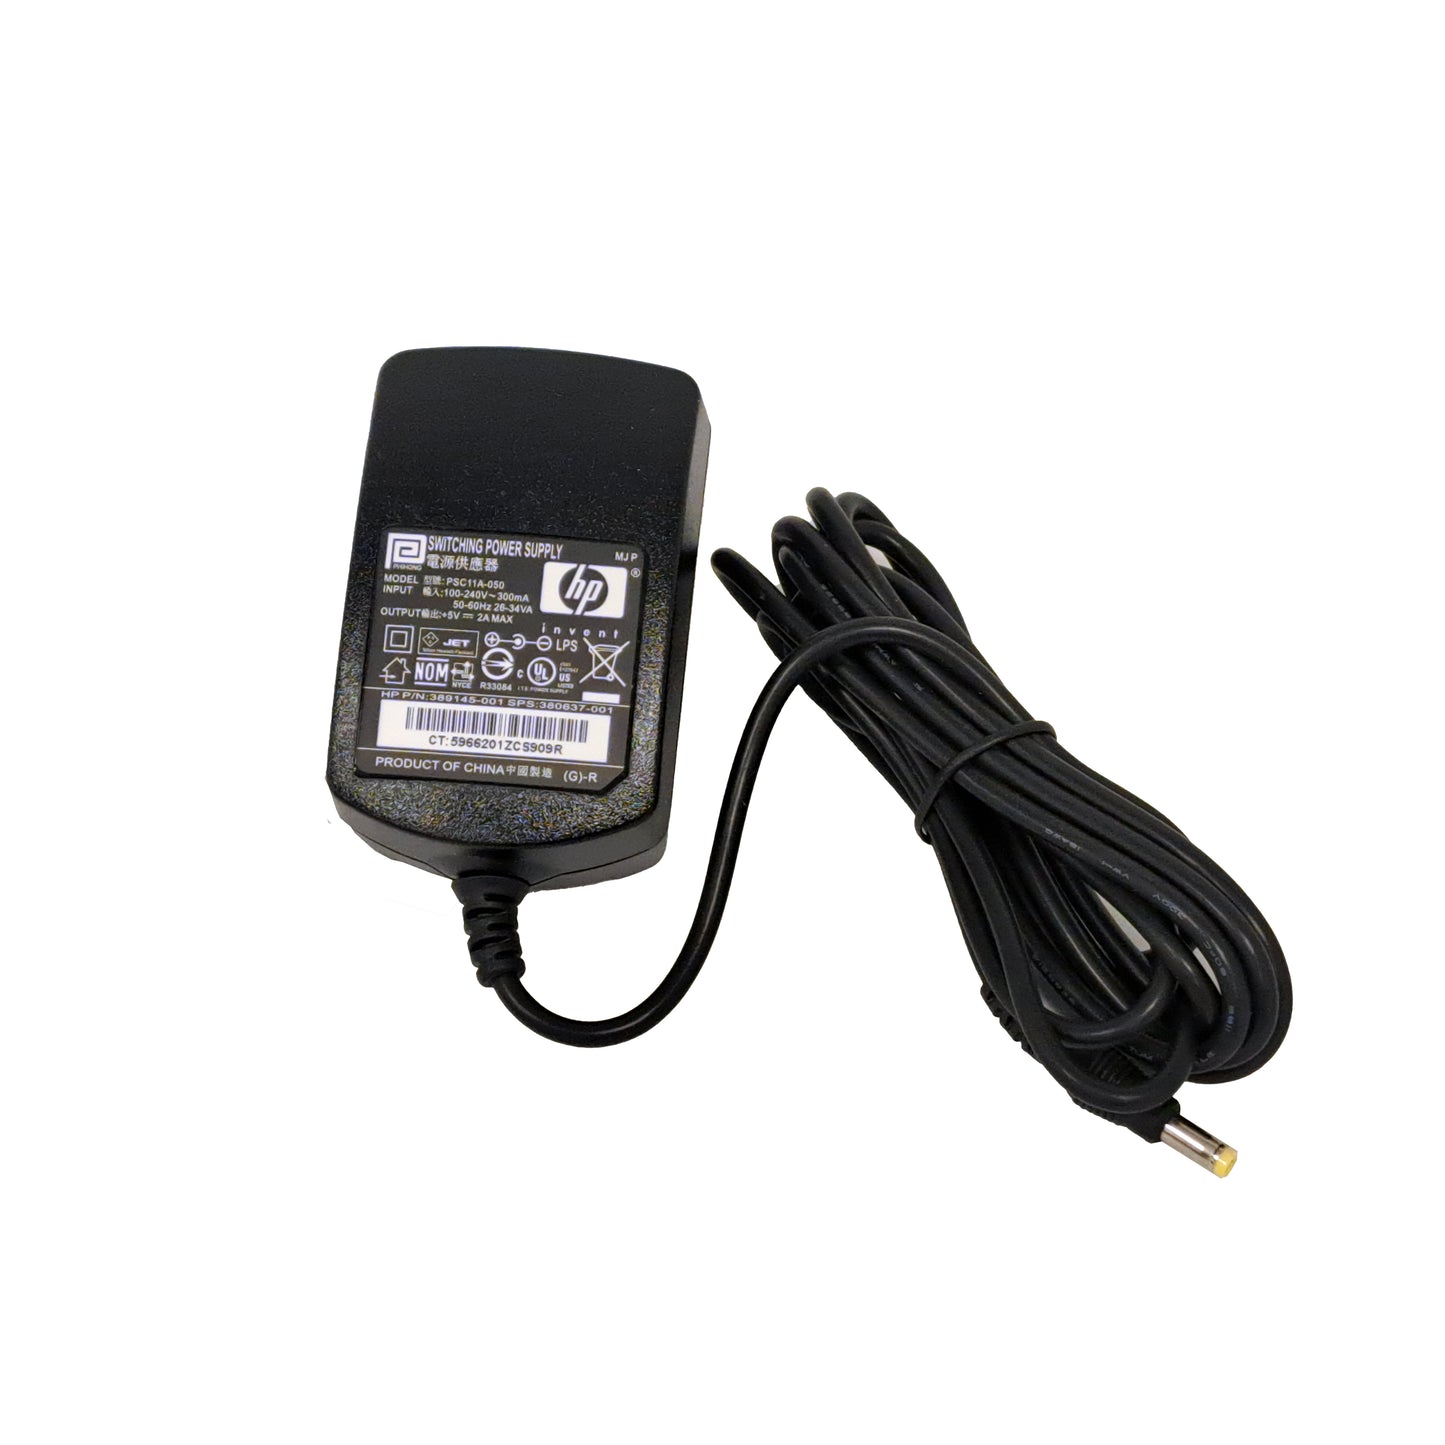 HP AC Power Adapter for HP iPAQ H3900 HX2000 - V2.0 (USA) - 374520-001